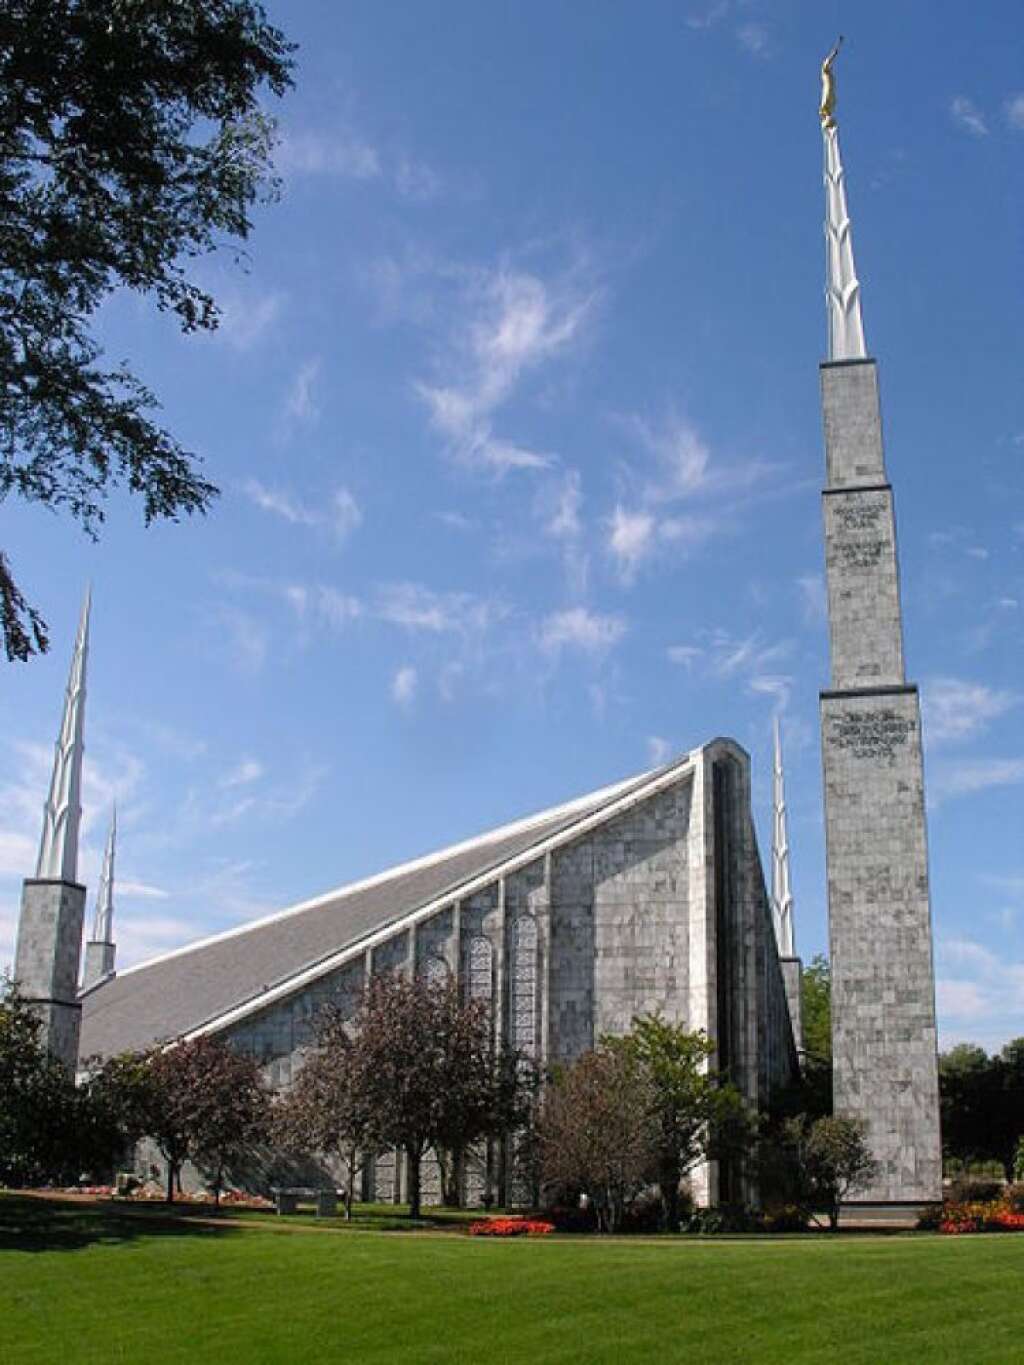 Illinois - 435 Mormons per 100,000 persons. <br>    Credit: Wikimedia Commons. Original photo <a href="http://en.wikipedia.org/wiki/File:Chicago_Illinois_Temple3.jpg" target="_hplink">here</a>.